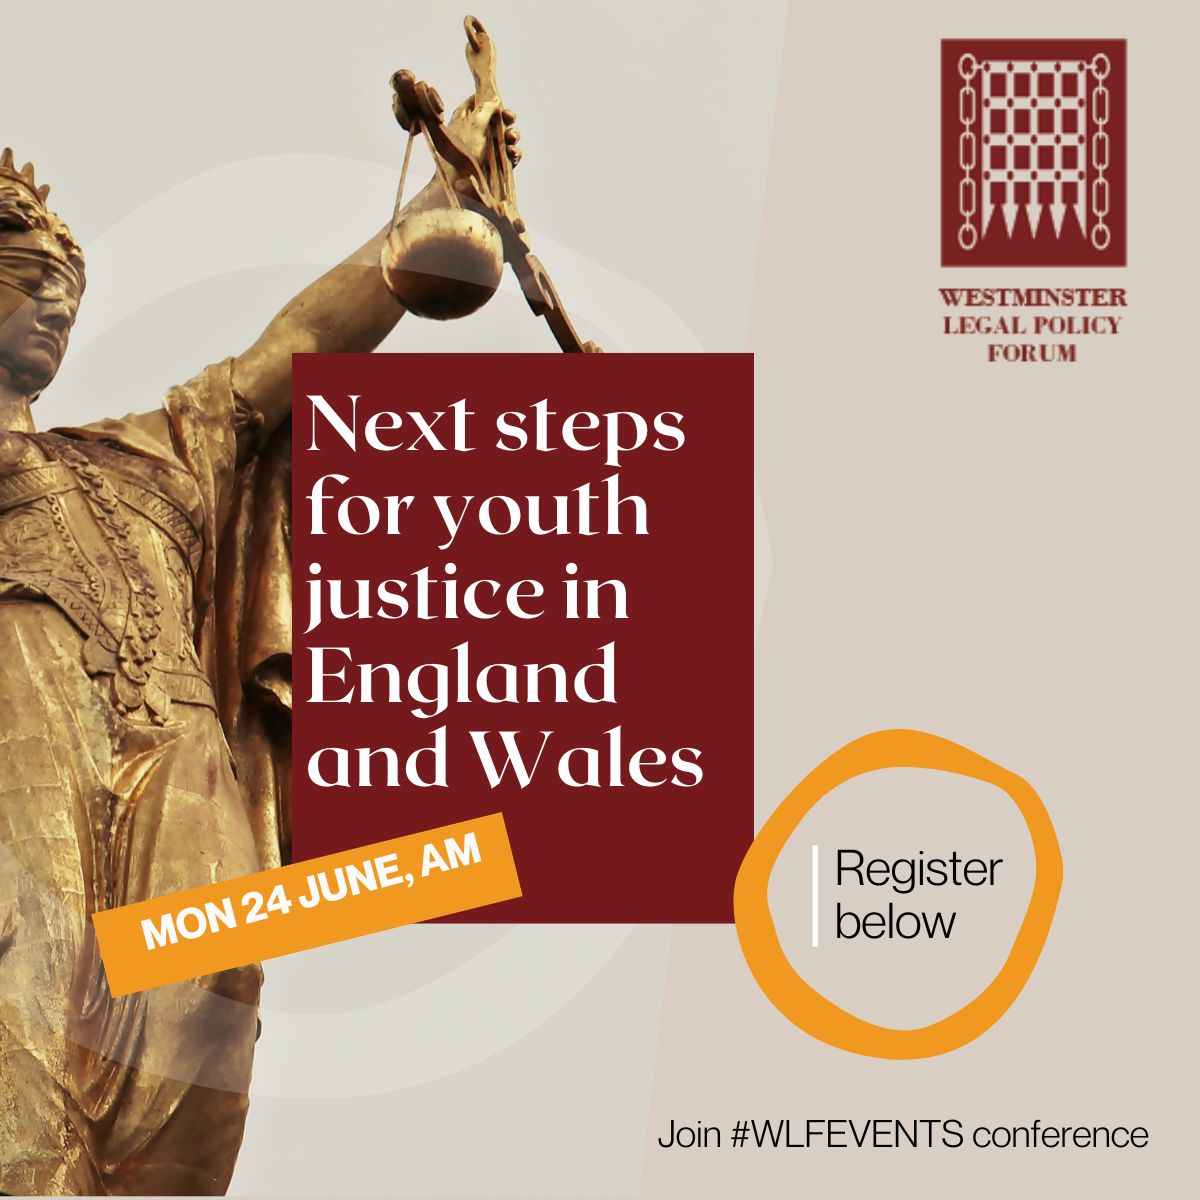 On June 24th we will be speaking @wfpevents on the ‘Next steps for youth justice in England and Wales’ #YouthJustice